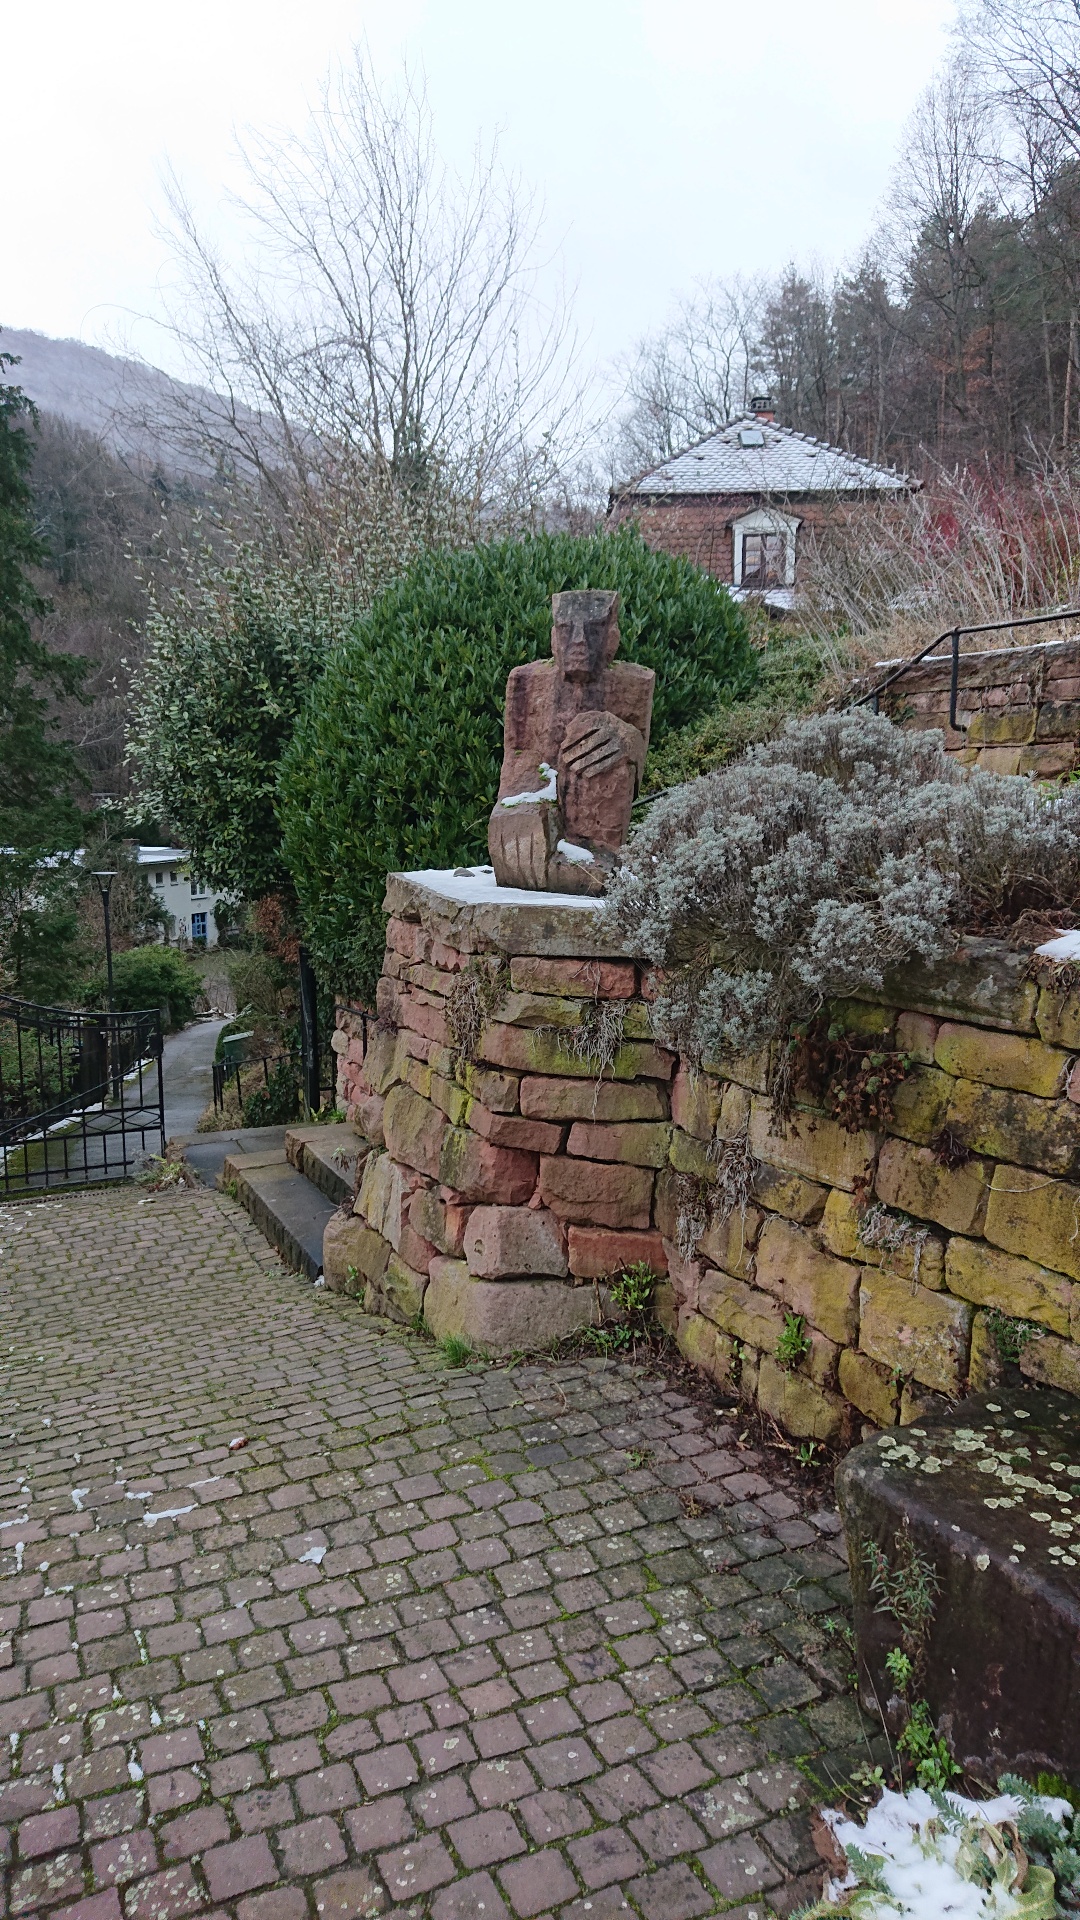 Dry stone walls, stairs, sculpture